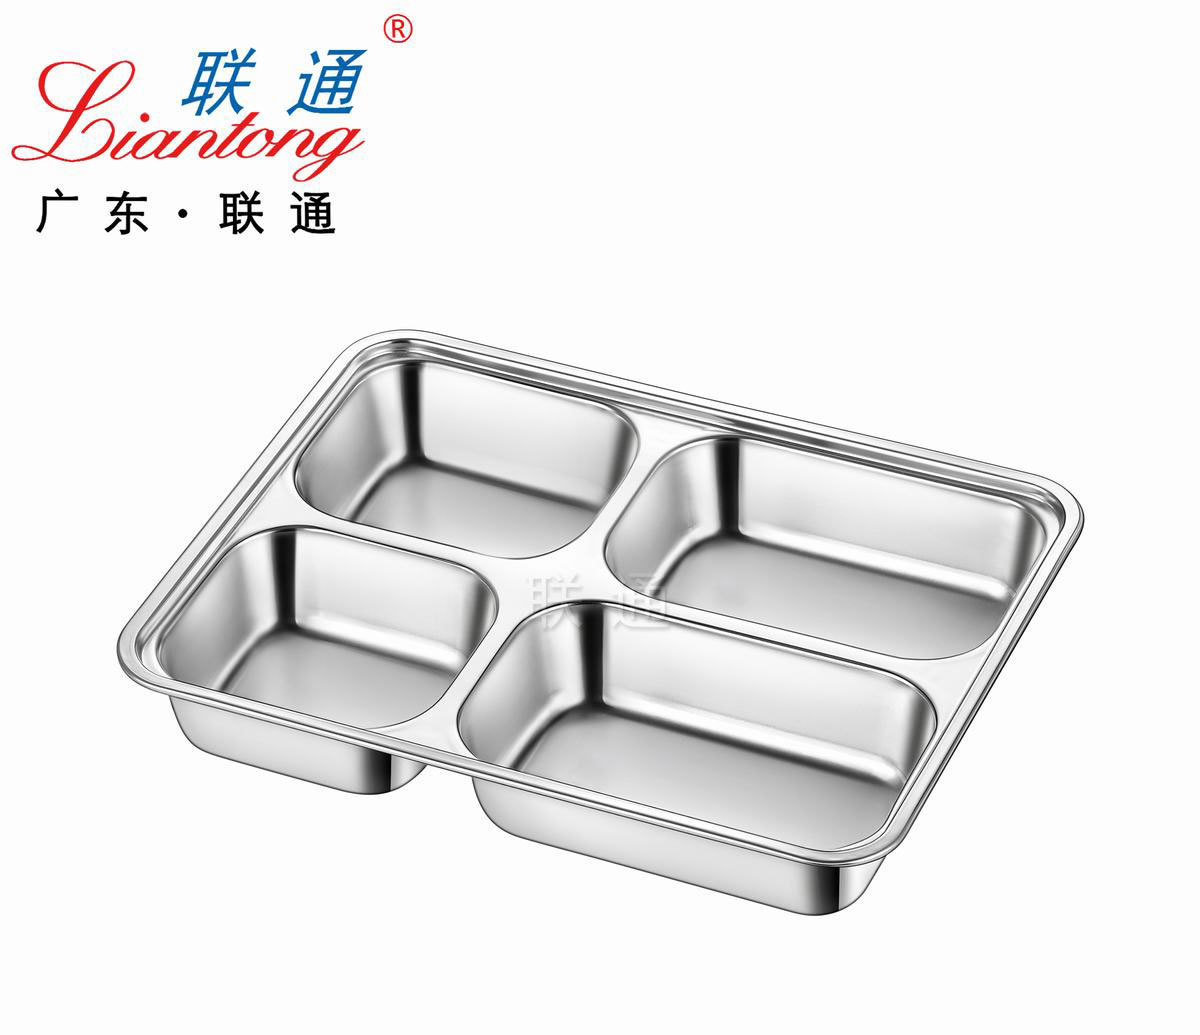 Large four-compartment fast food plate